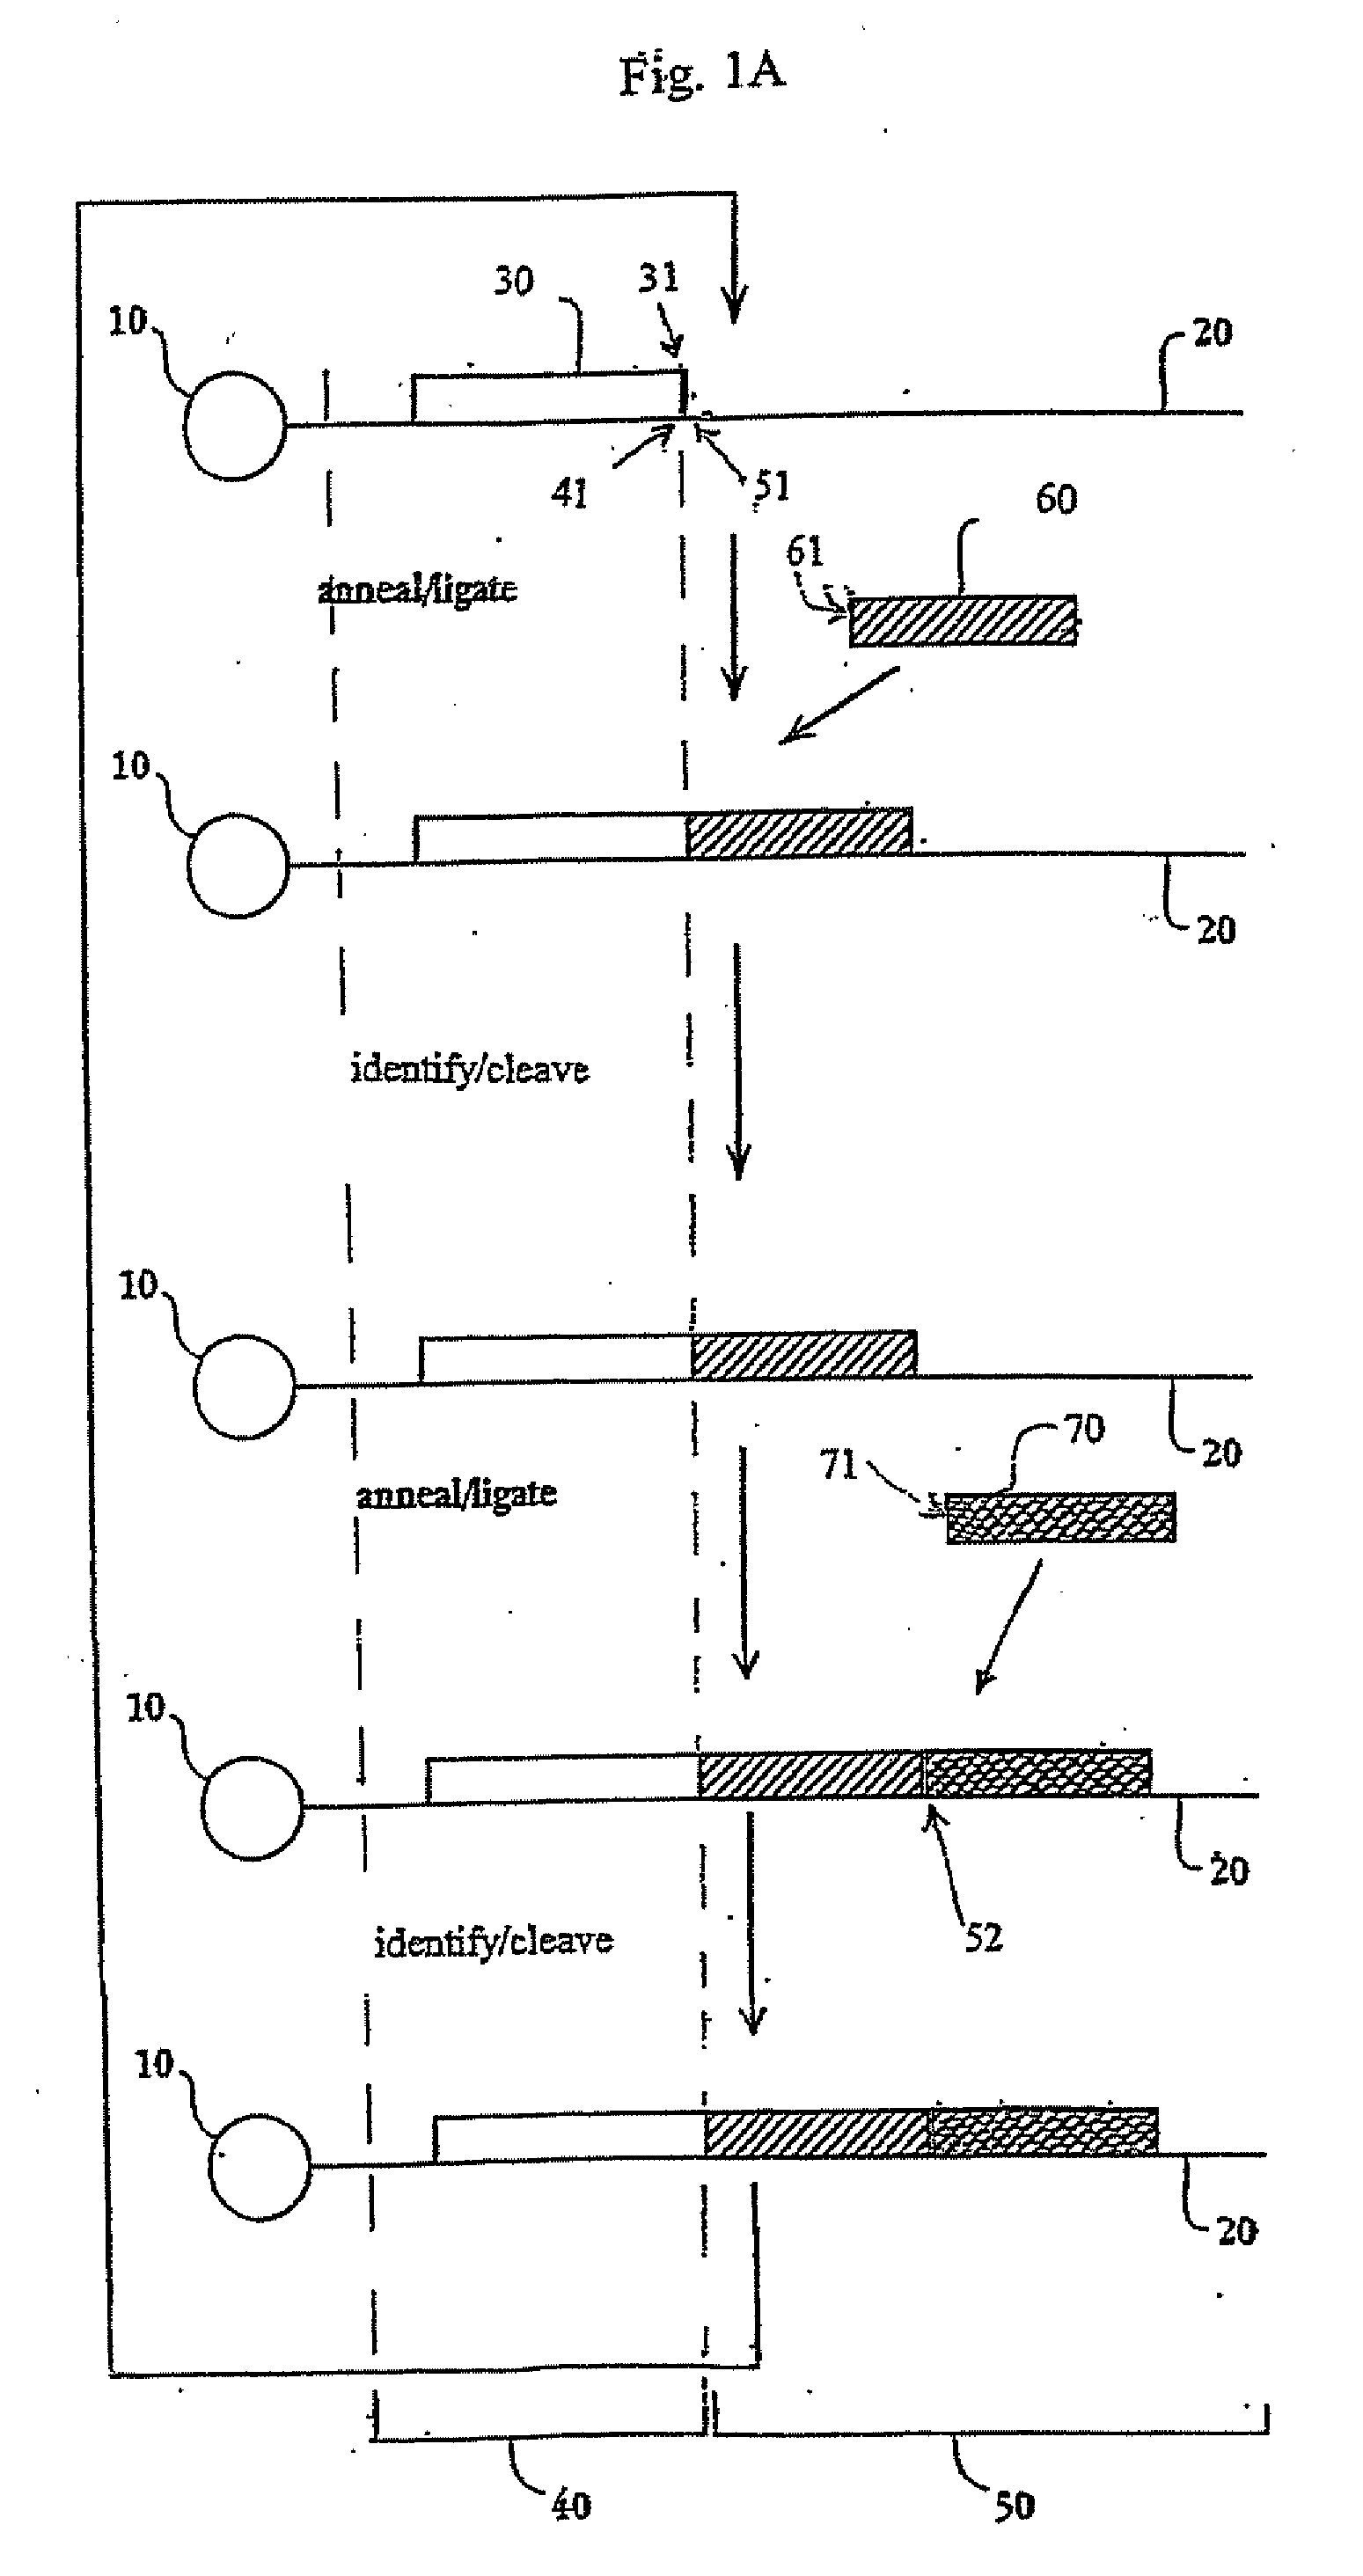 Reagents, methods, and libraries for gel-free bead-based sequencing